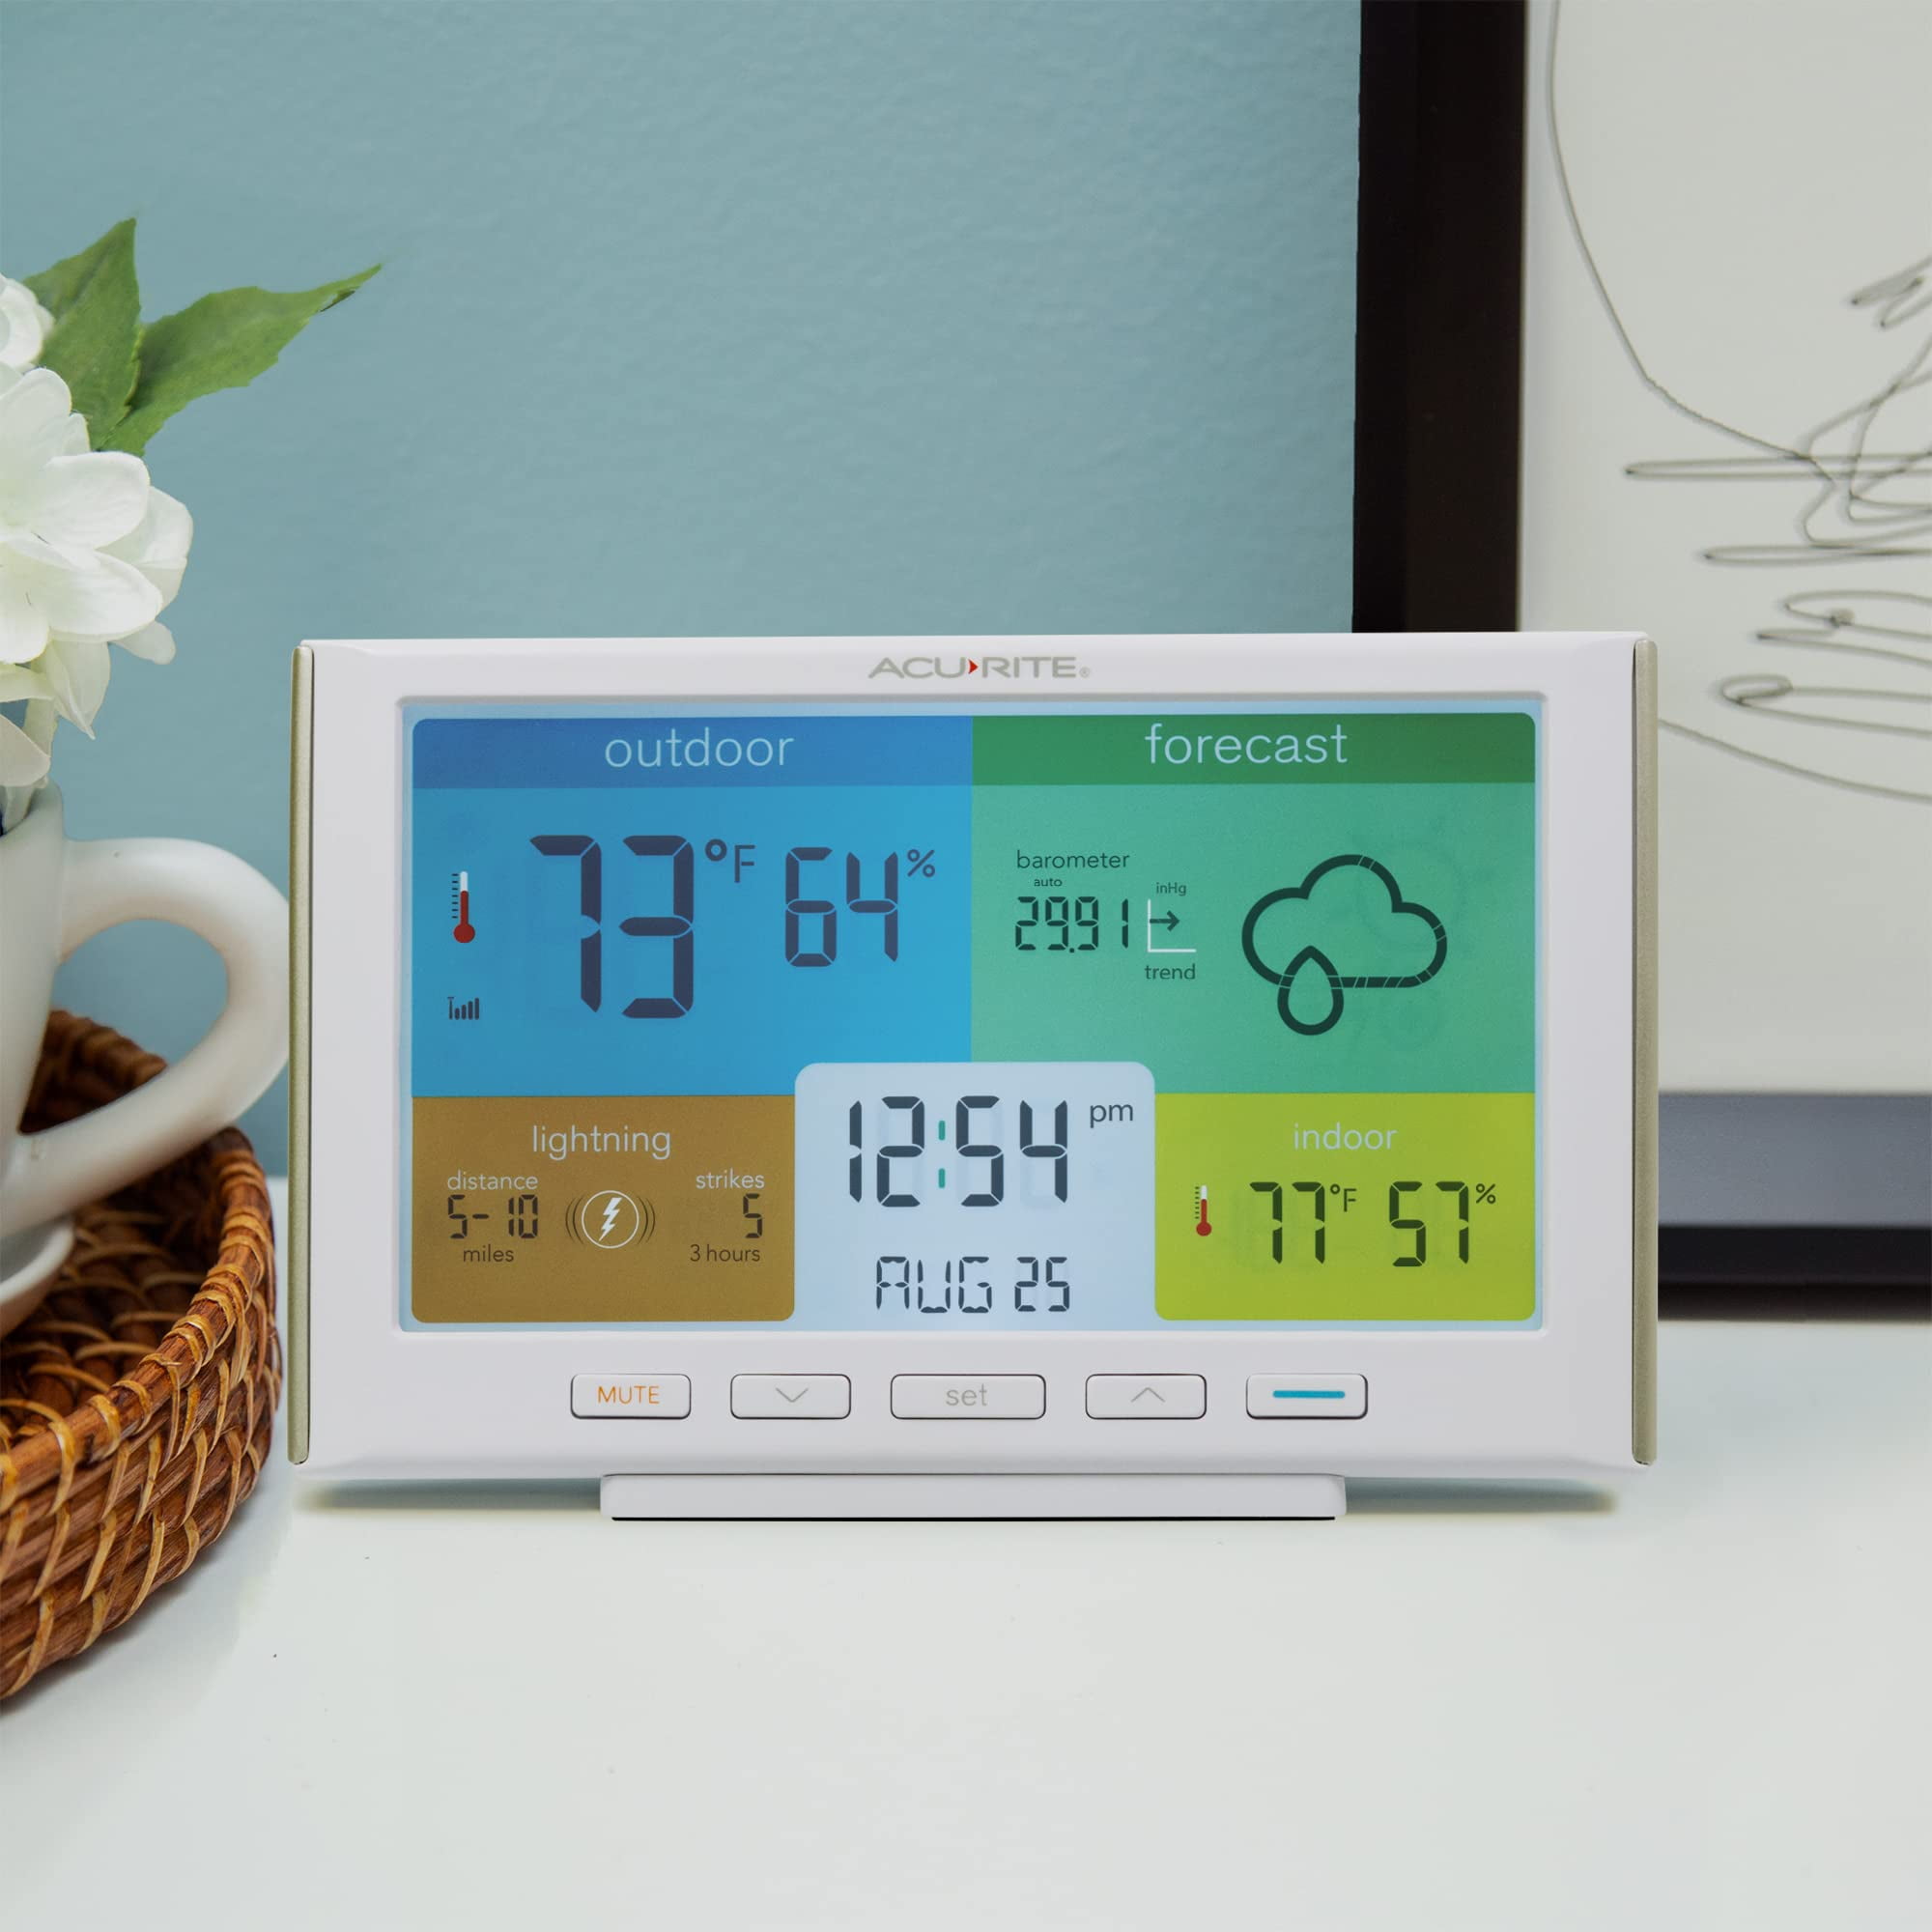 AcuRite Weather Station 01097 